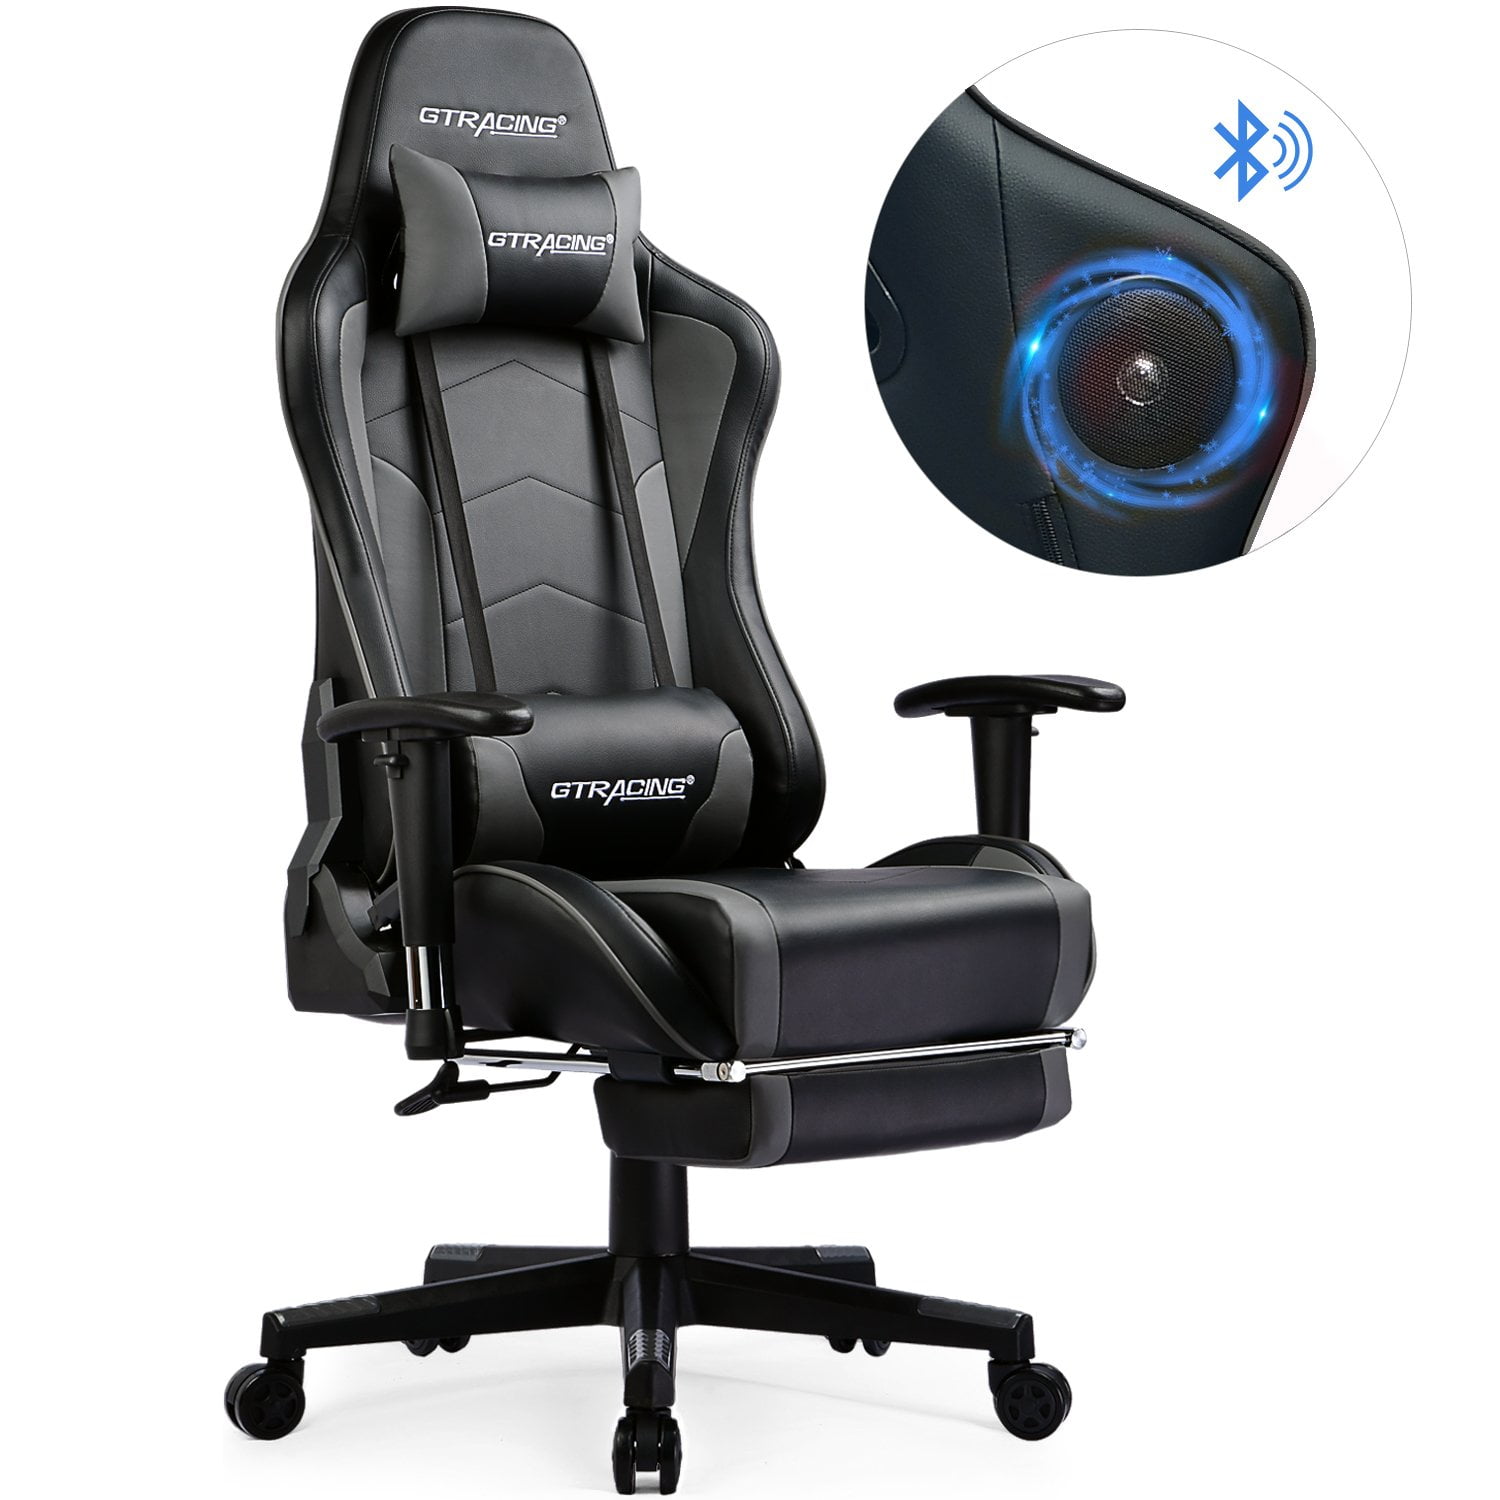 Minimalist Gtracing Gaming Chair With Bluetooth Speakers for Living room